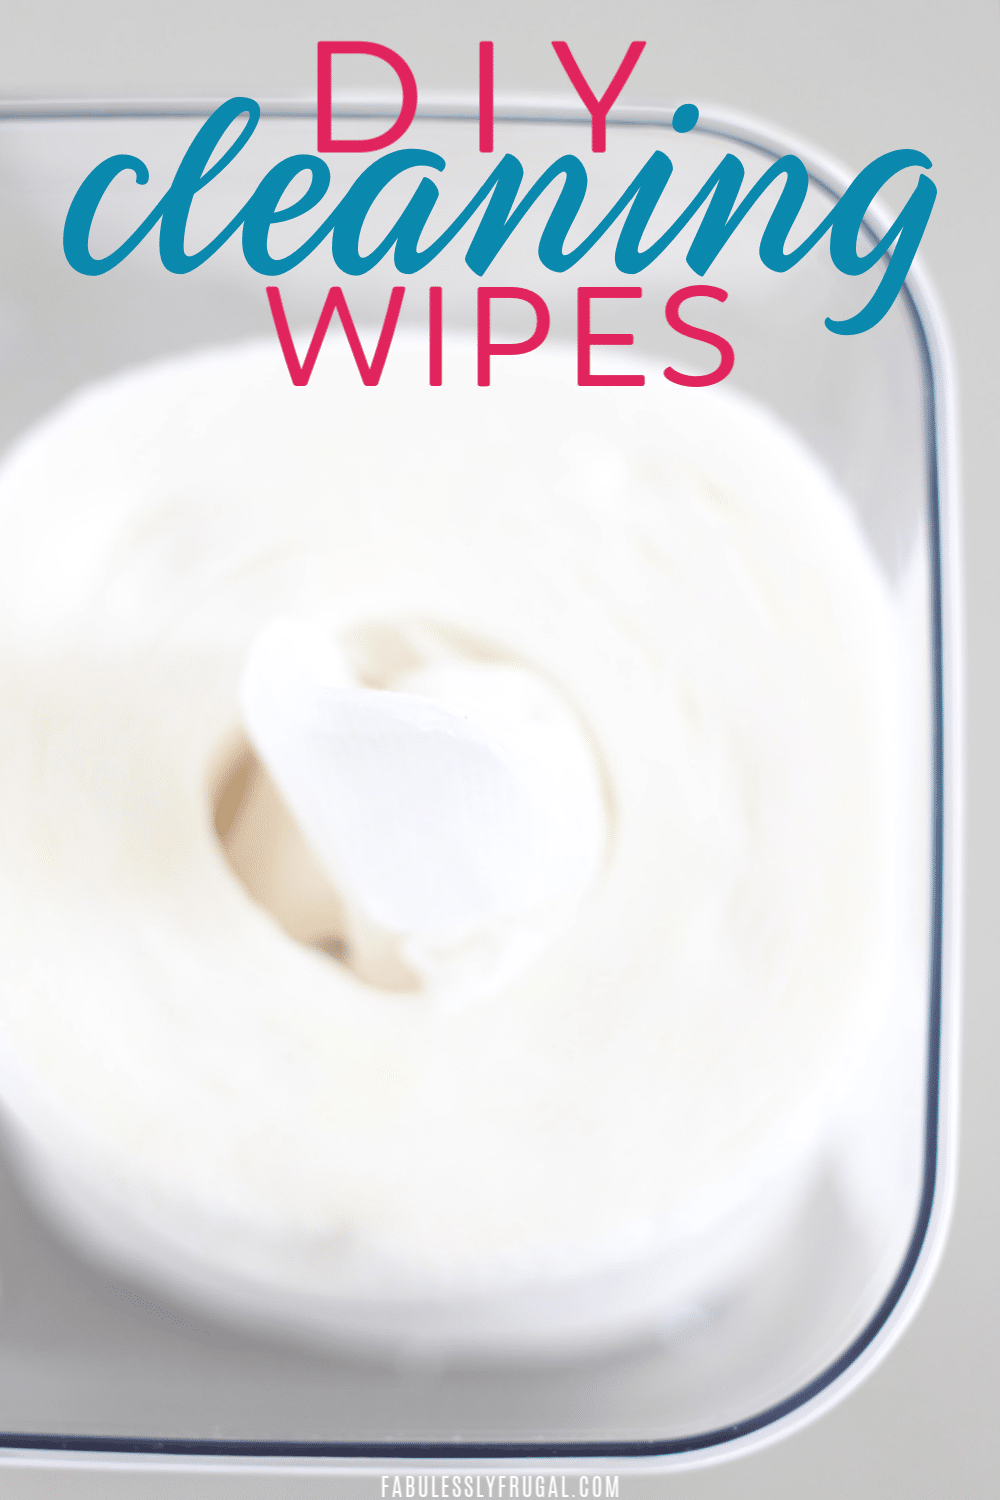 Make your own paper towel cleaning wipes